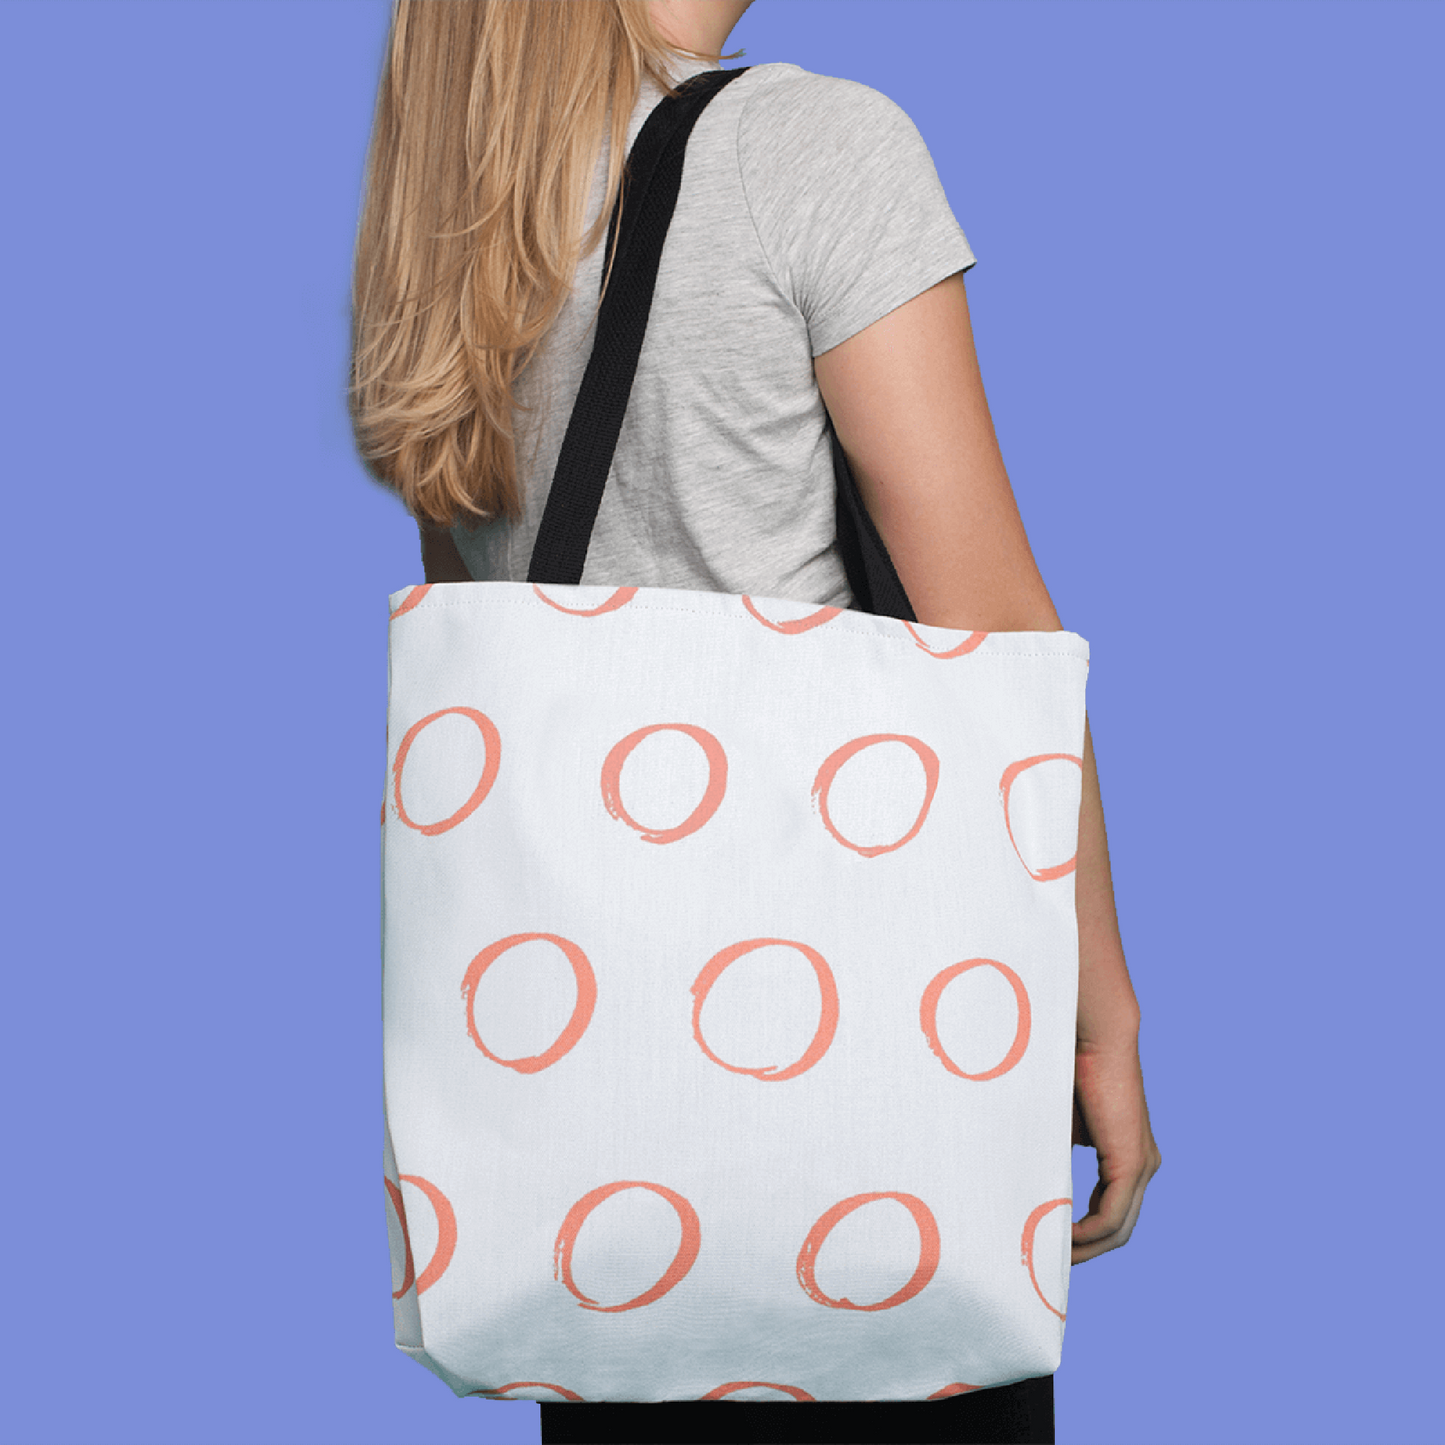 Camping Tote Bag, Travel, Weekender Bag, Cute Overnight Canvas Tote